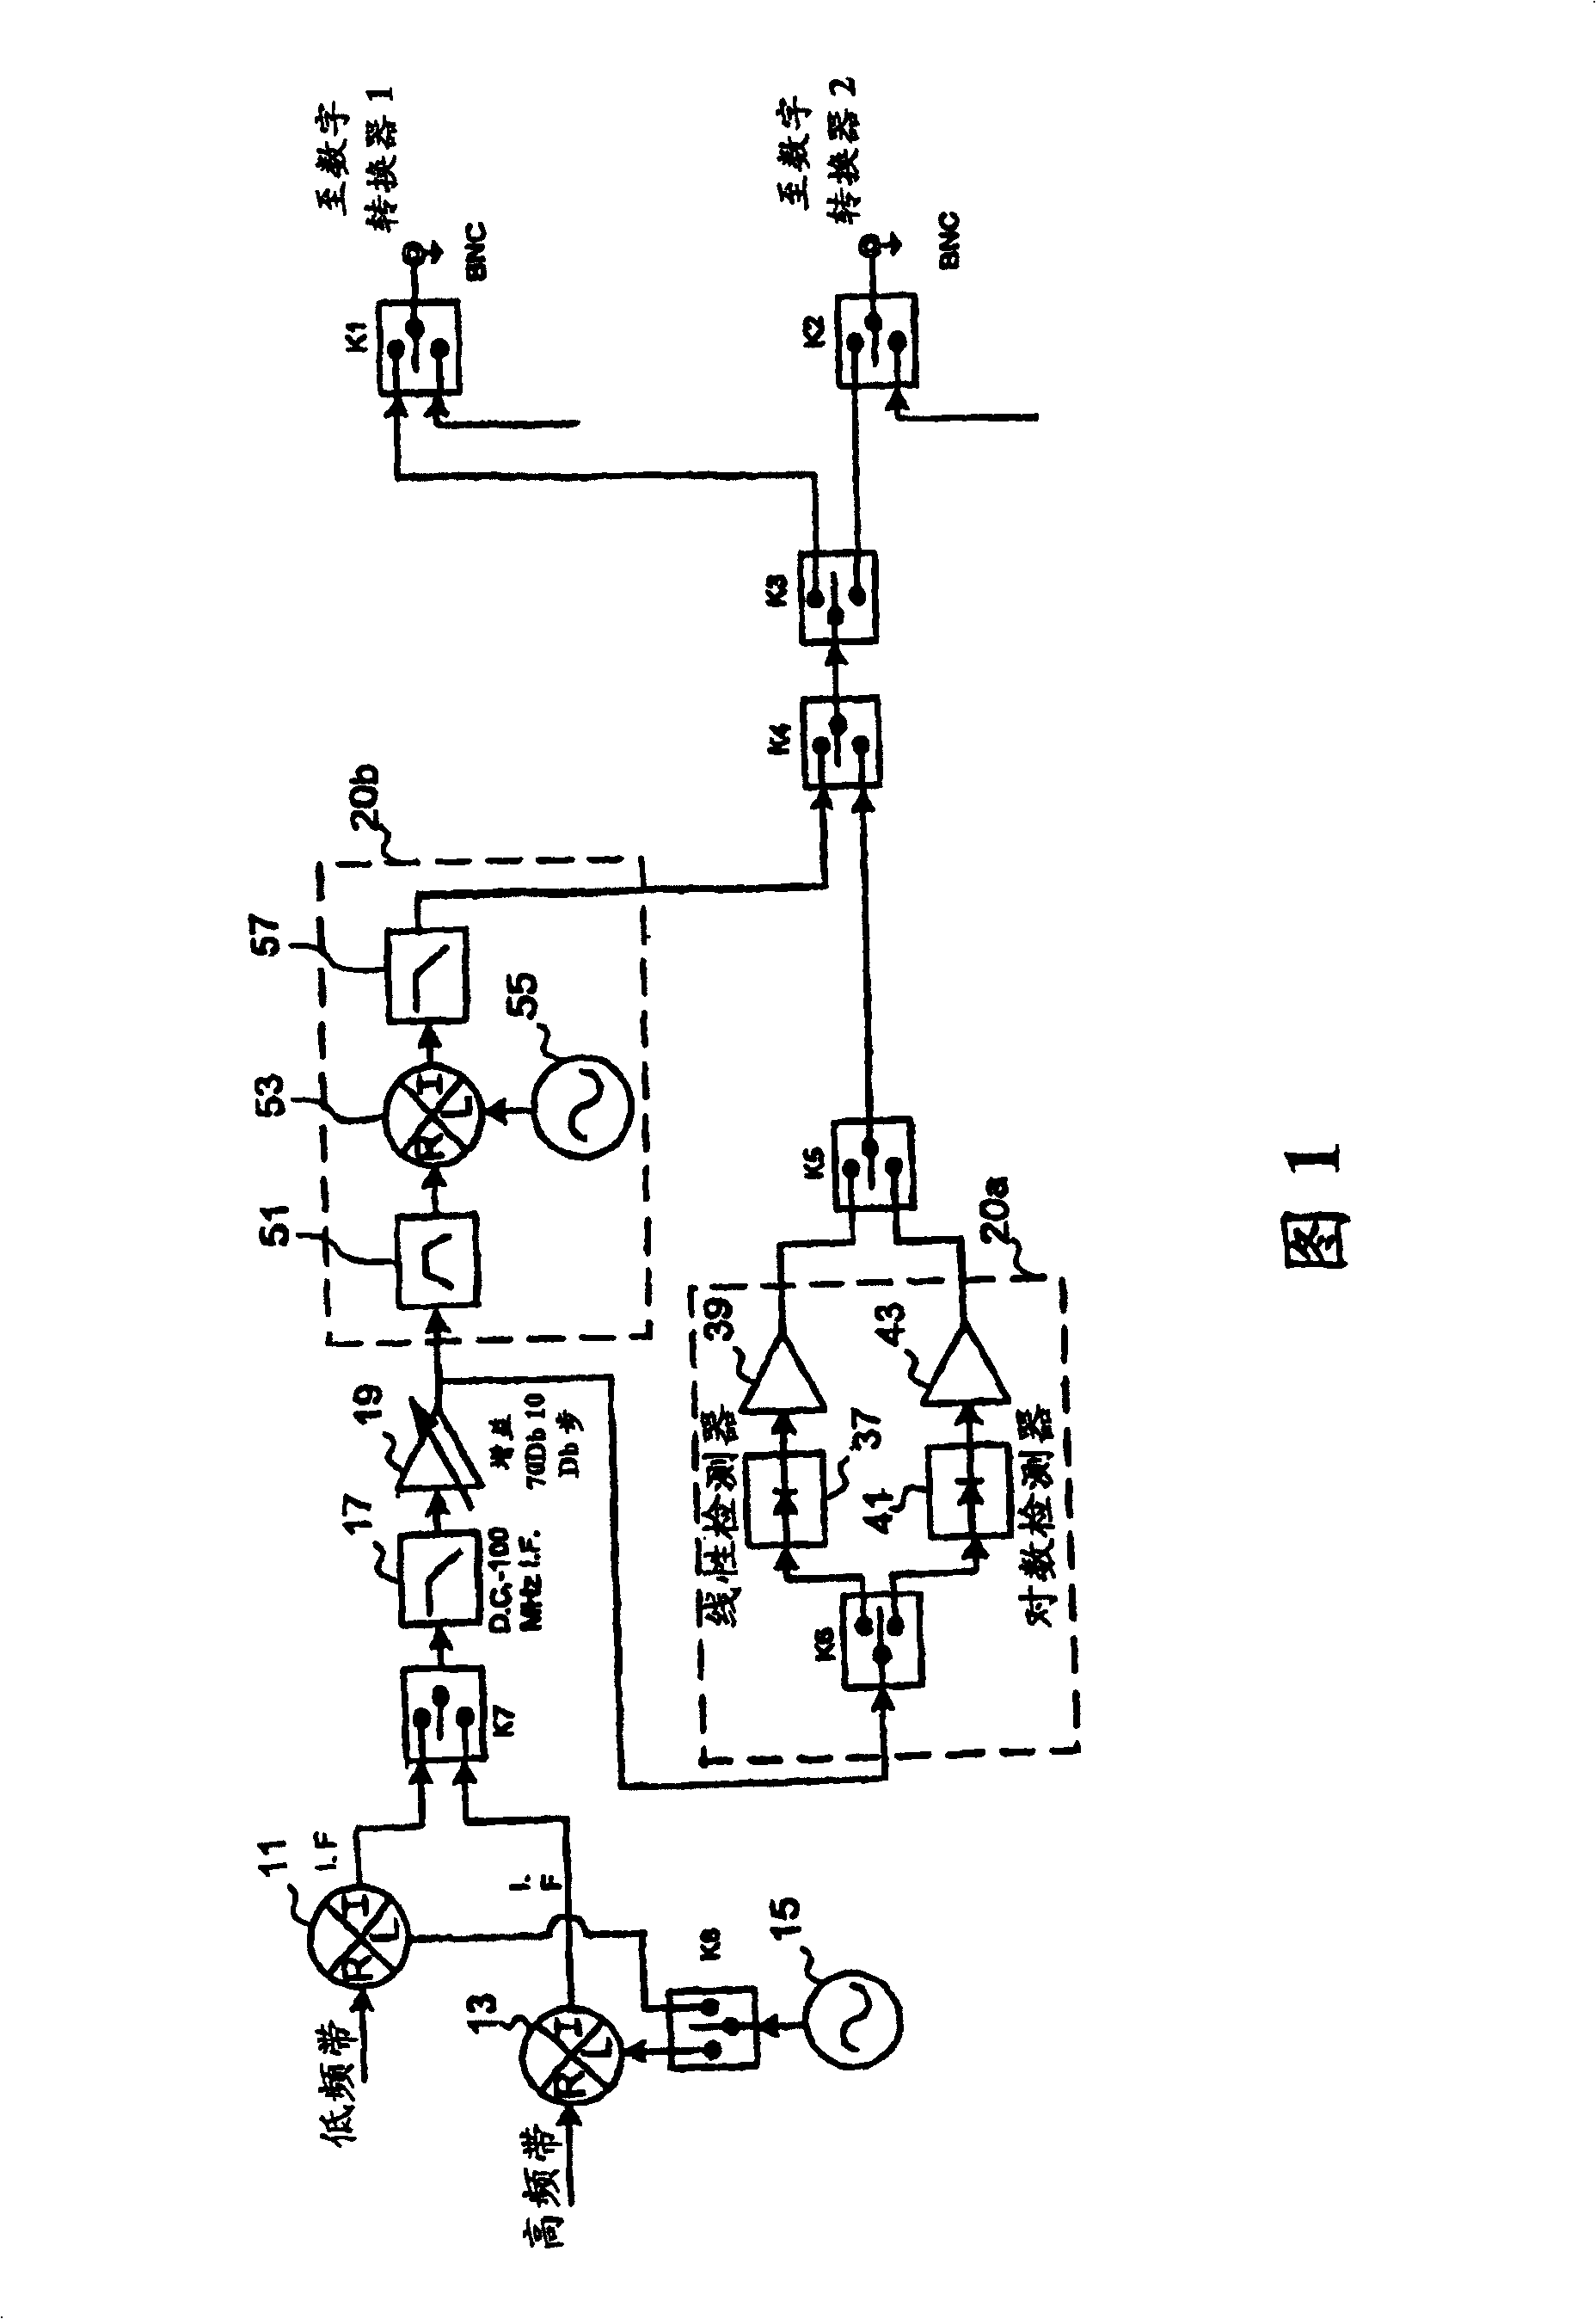 Synthetic RF detection system and method